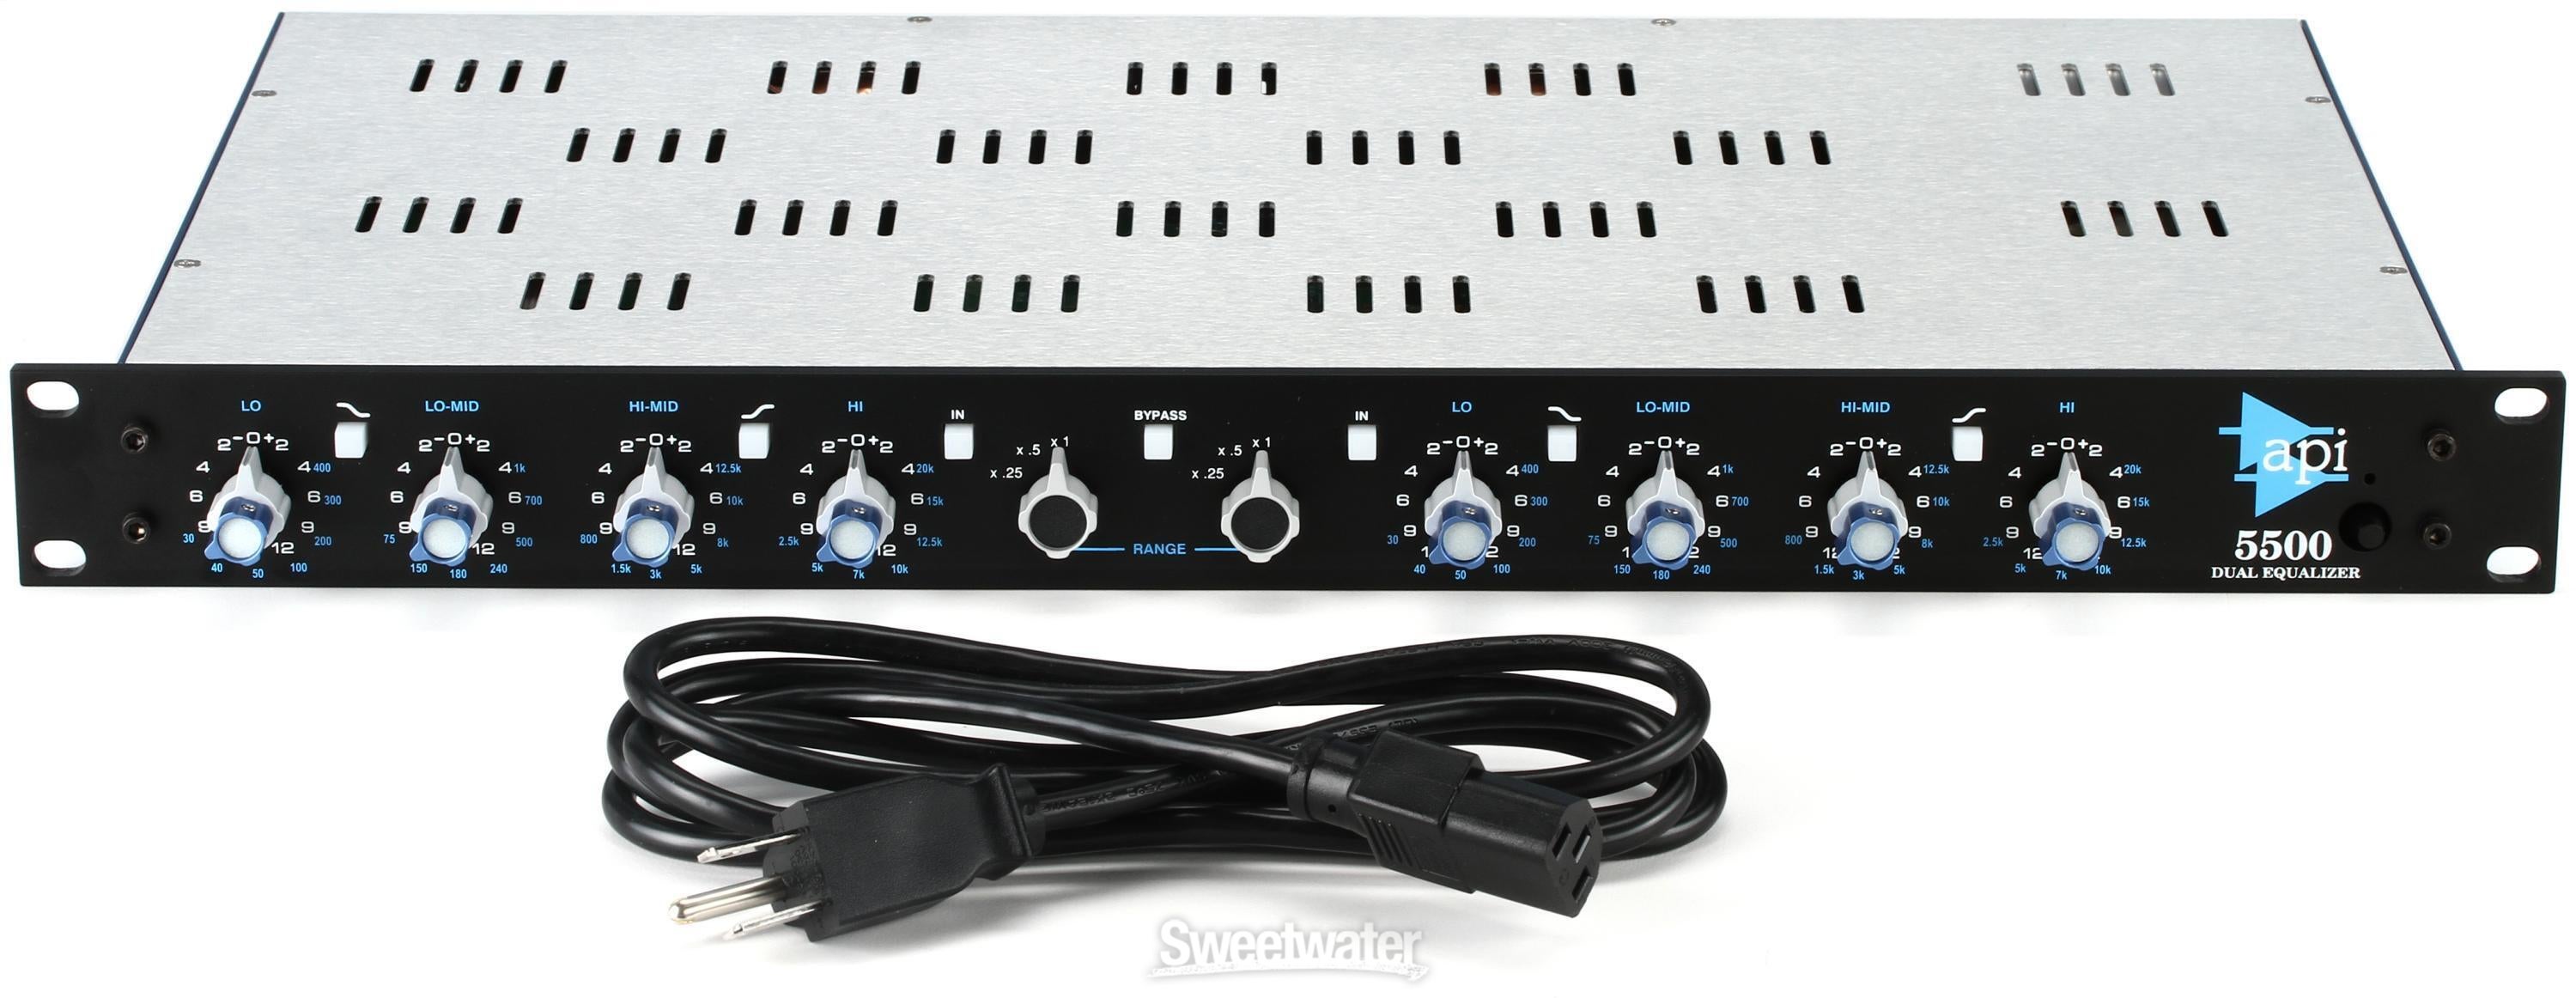 API 5500 2-channel Parametric Equalizer | Sweetwater